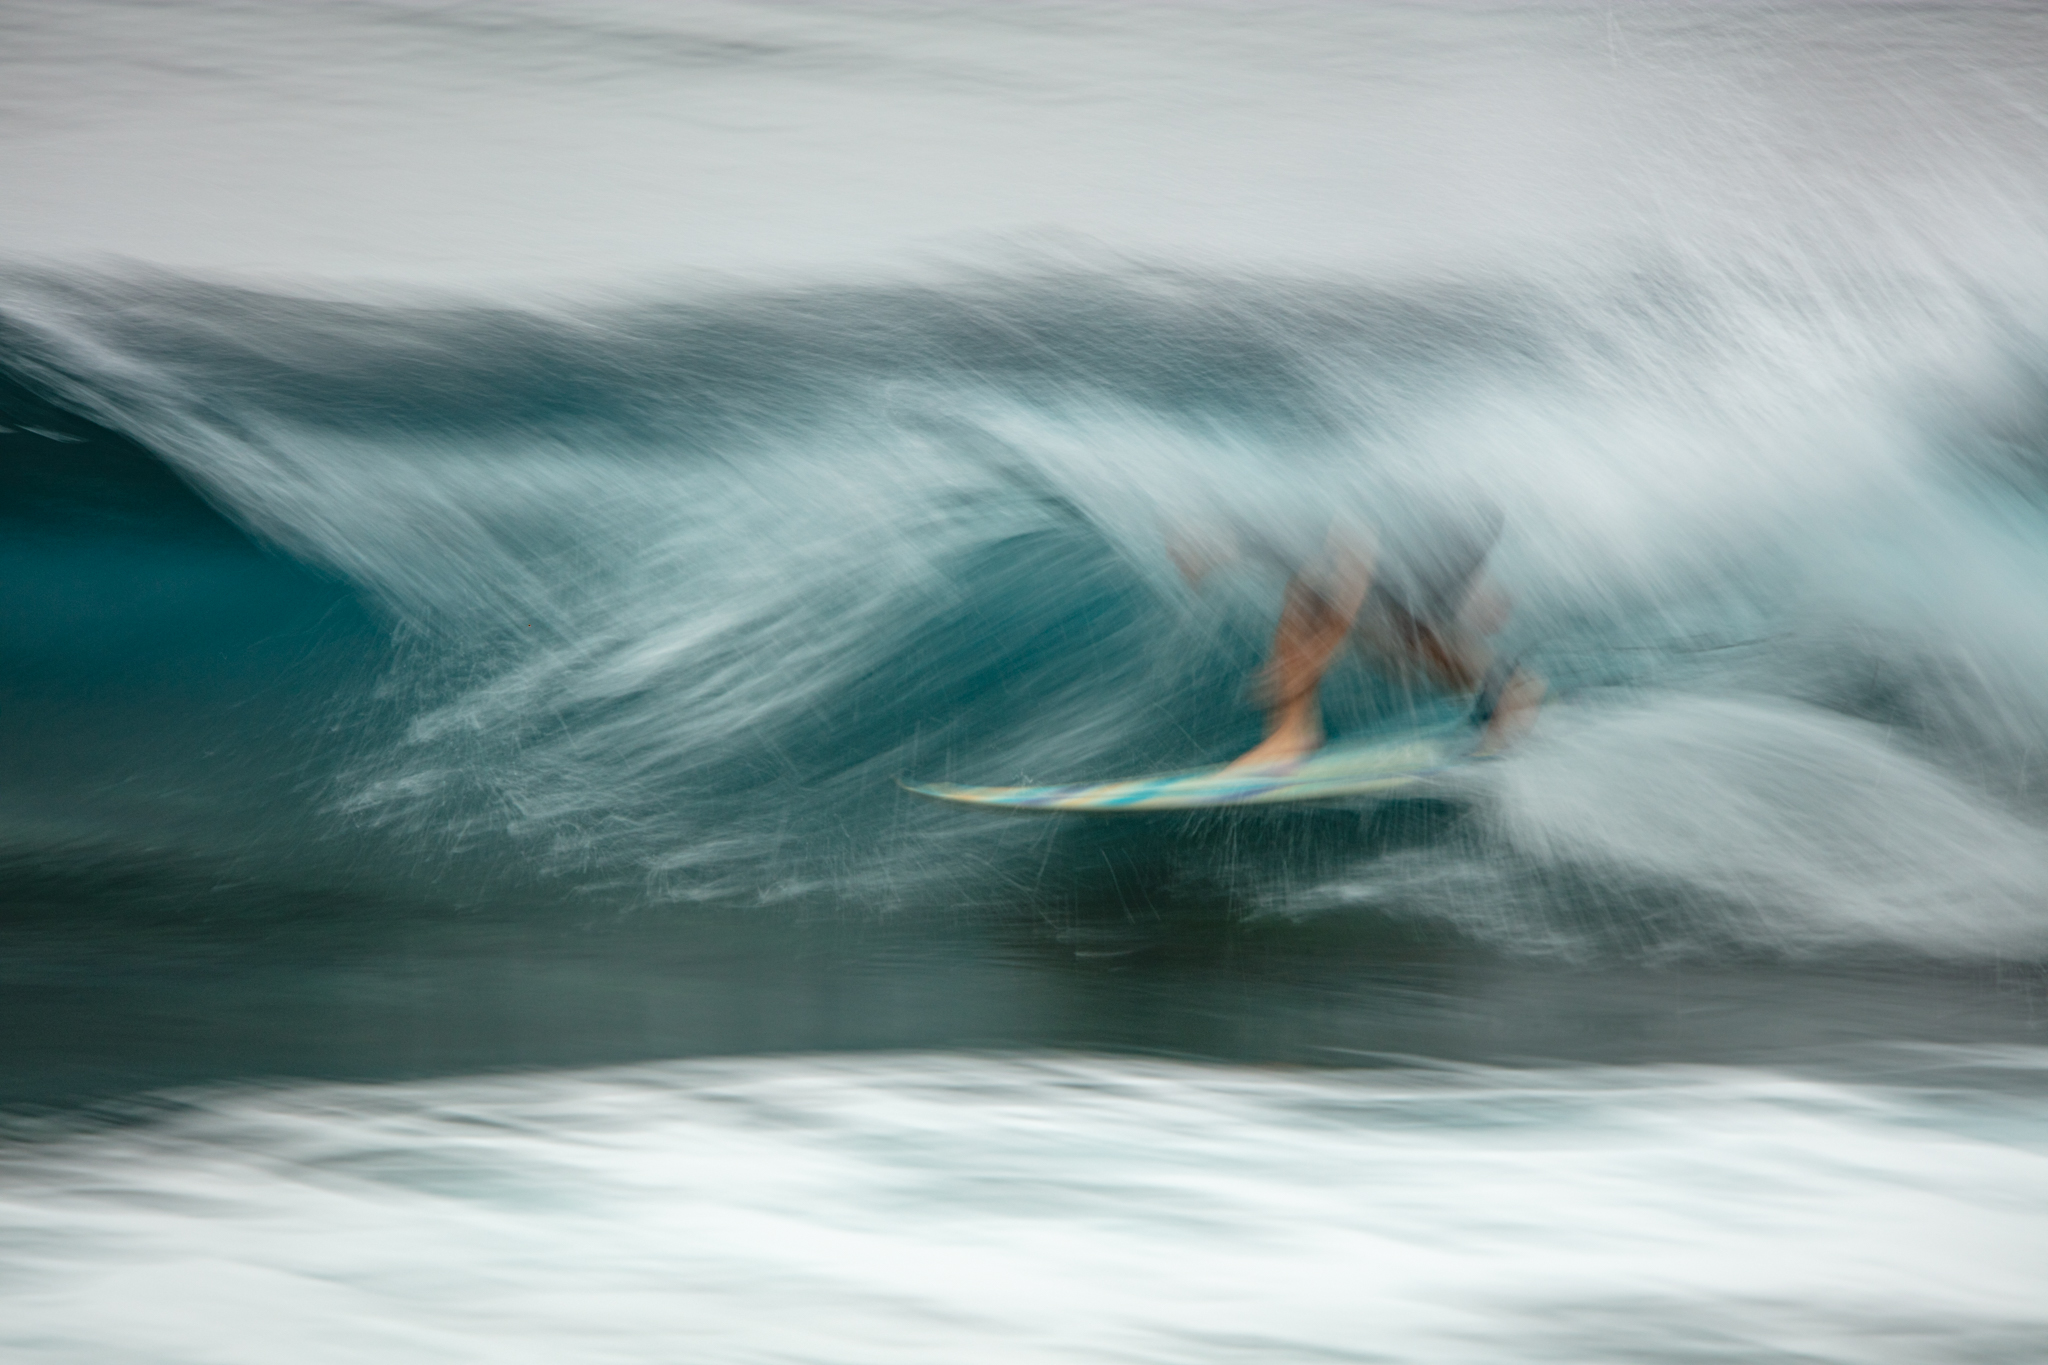 Motion blur in surf photography